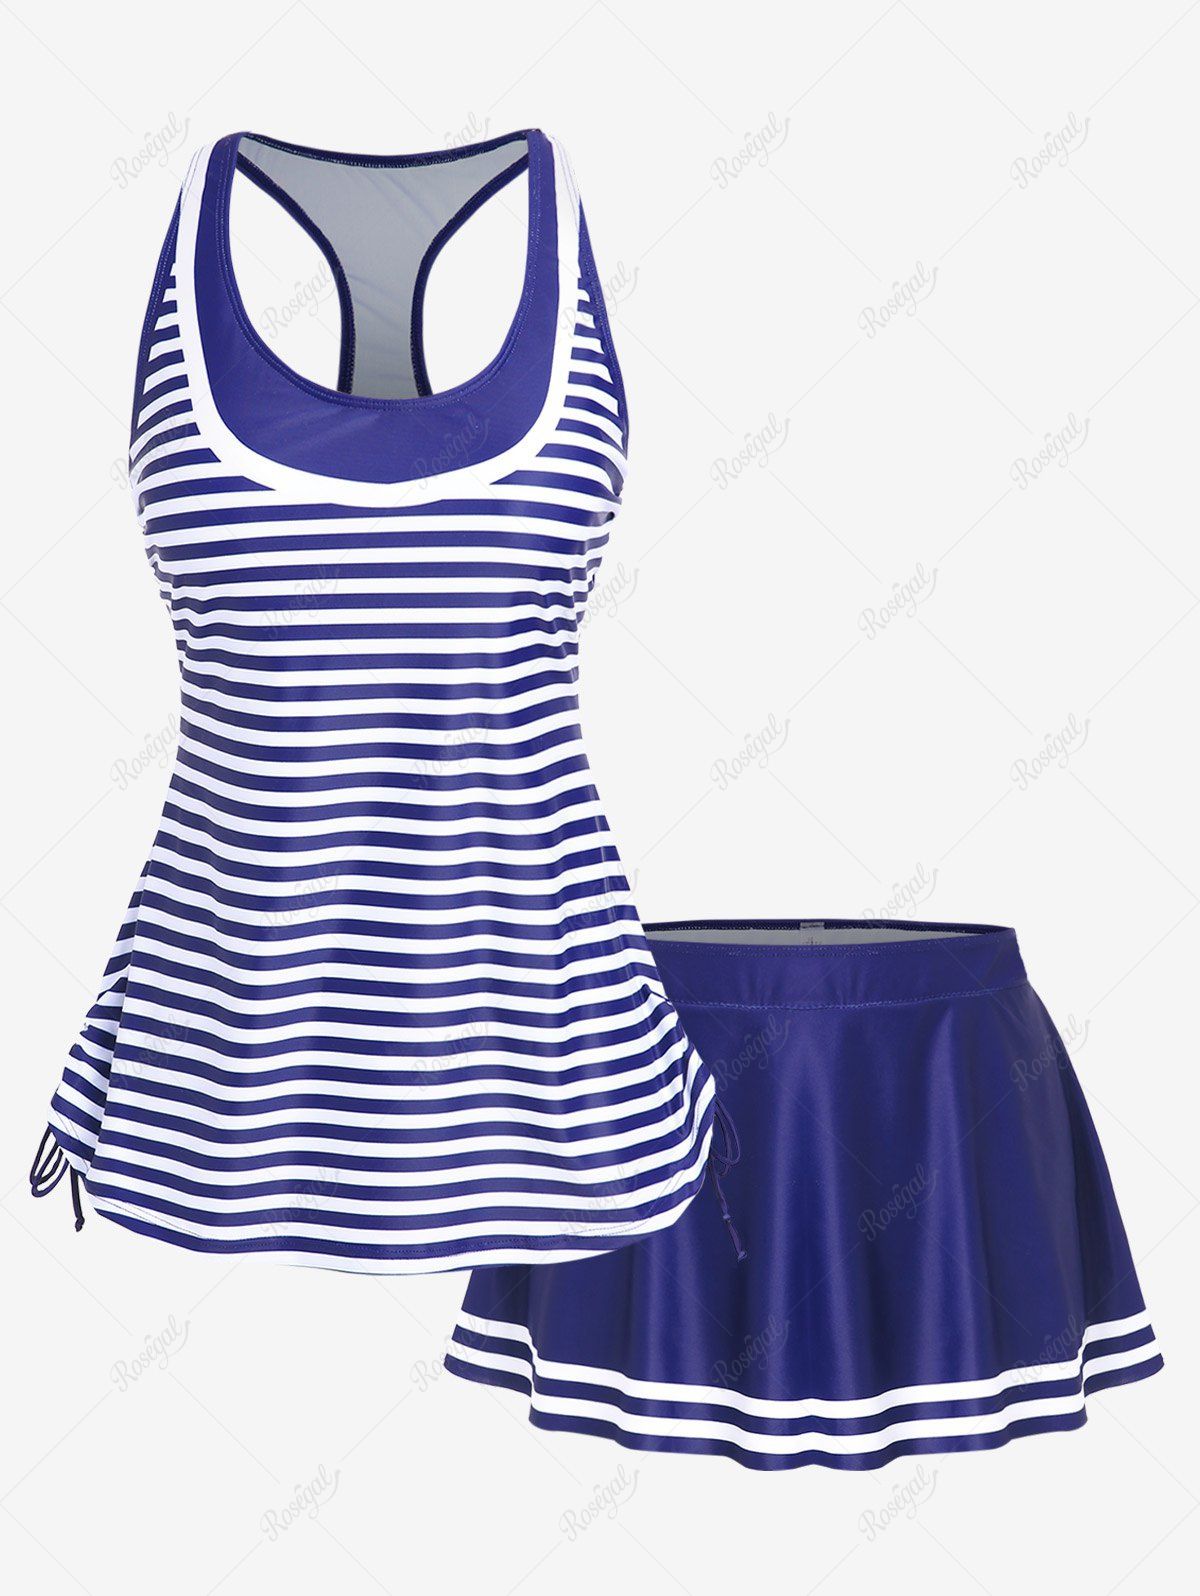 Chic Plus Size Racerback Stripes Cinched Ruched Padded Skort Tankini Swimsuit  